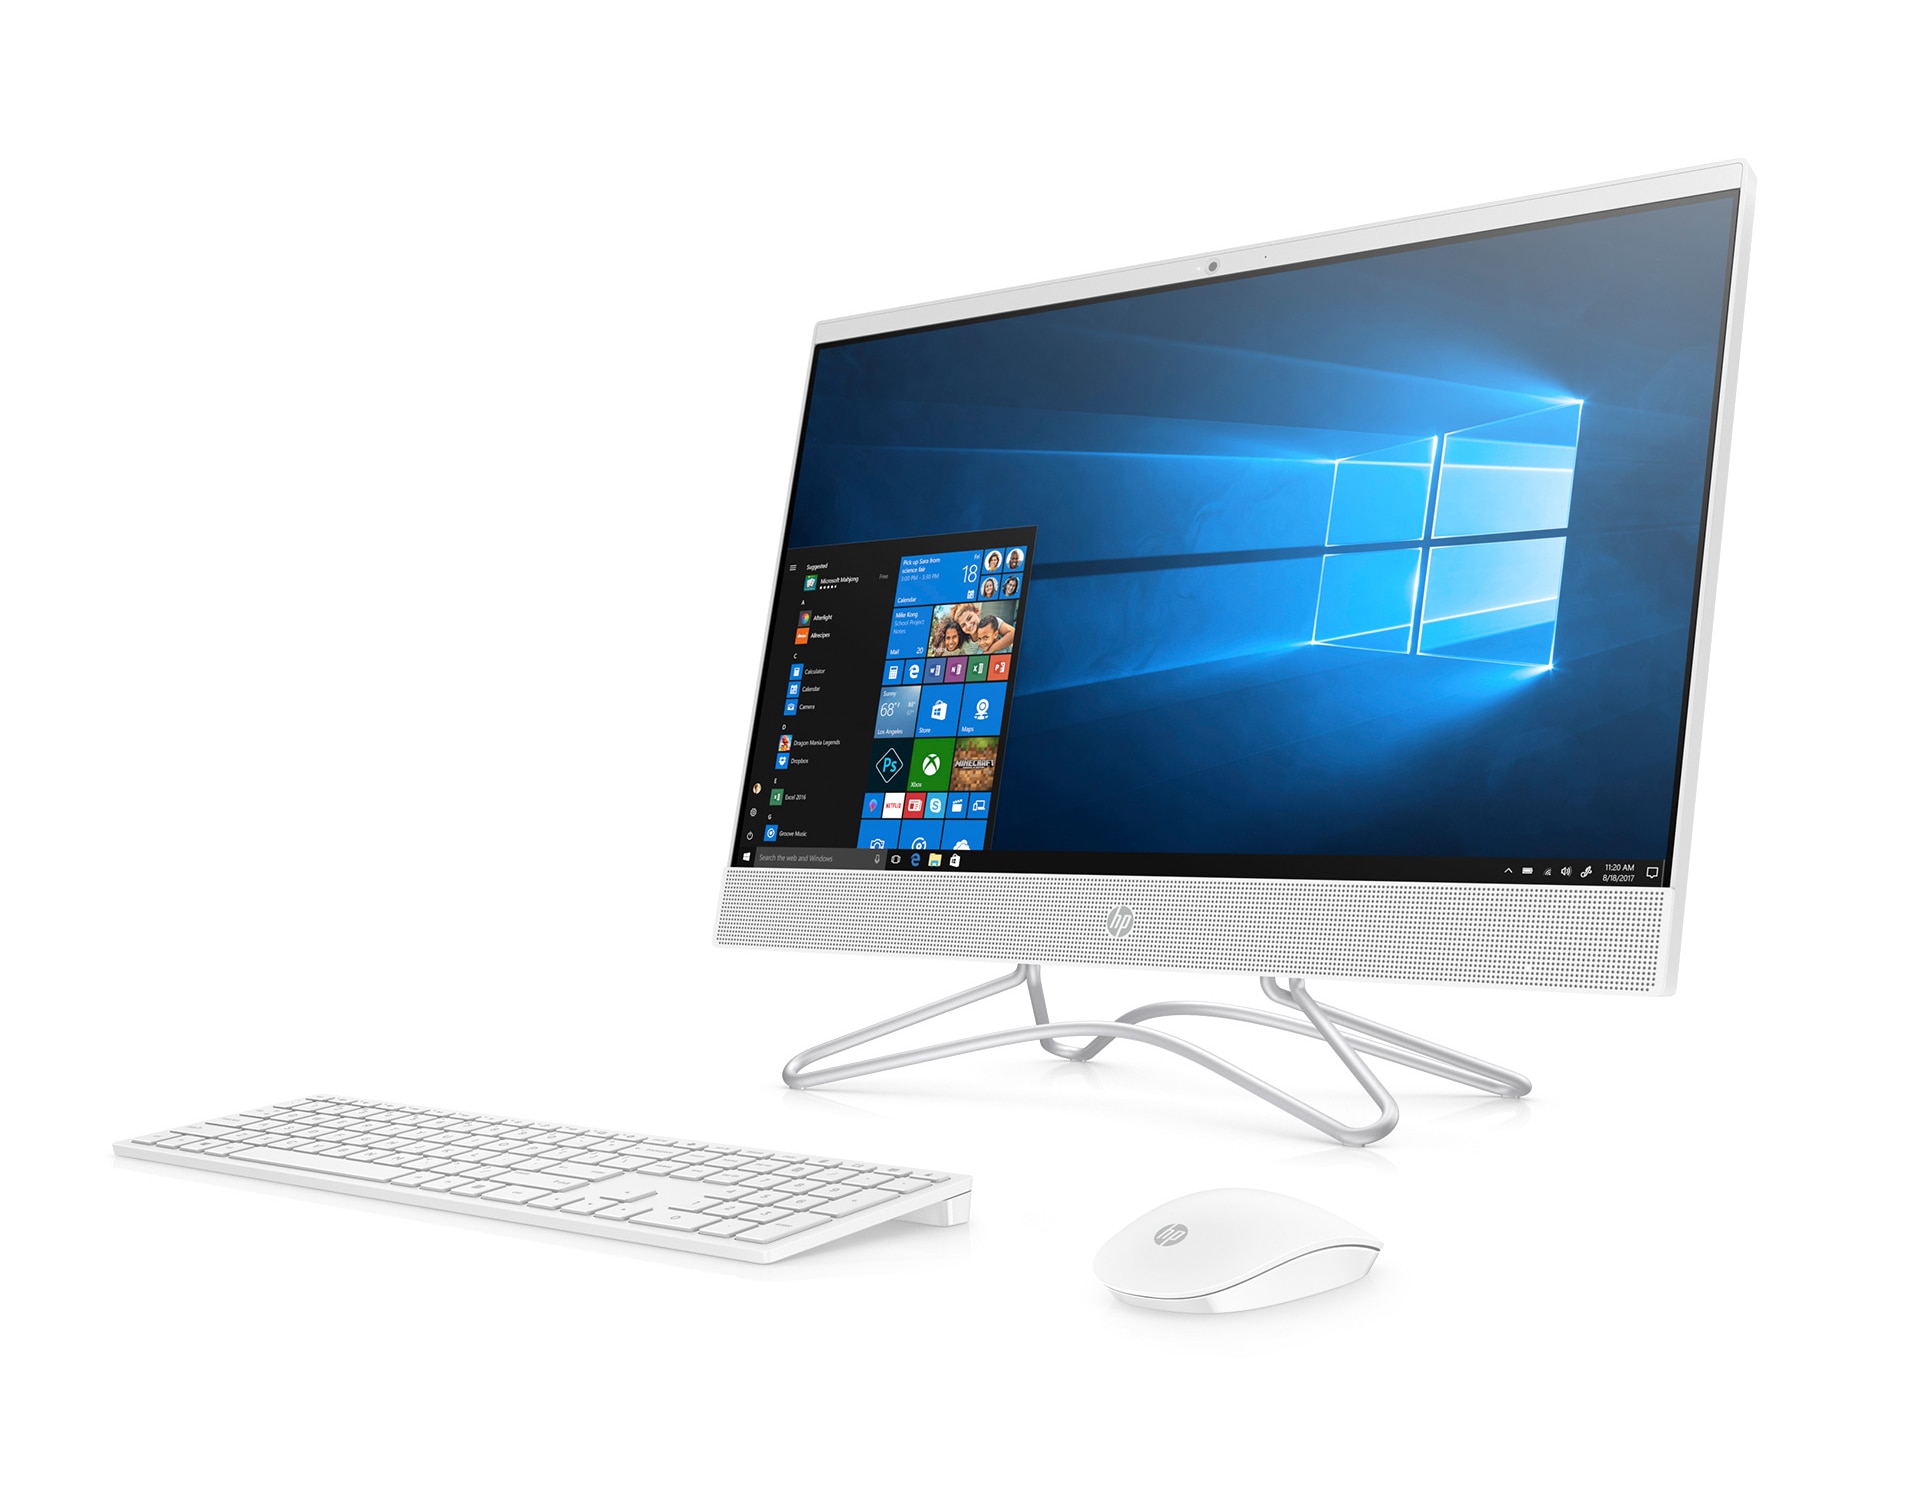 HP All-in-One 24 製品詳細 - デスクトップパソコン | 日本HP